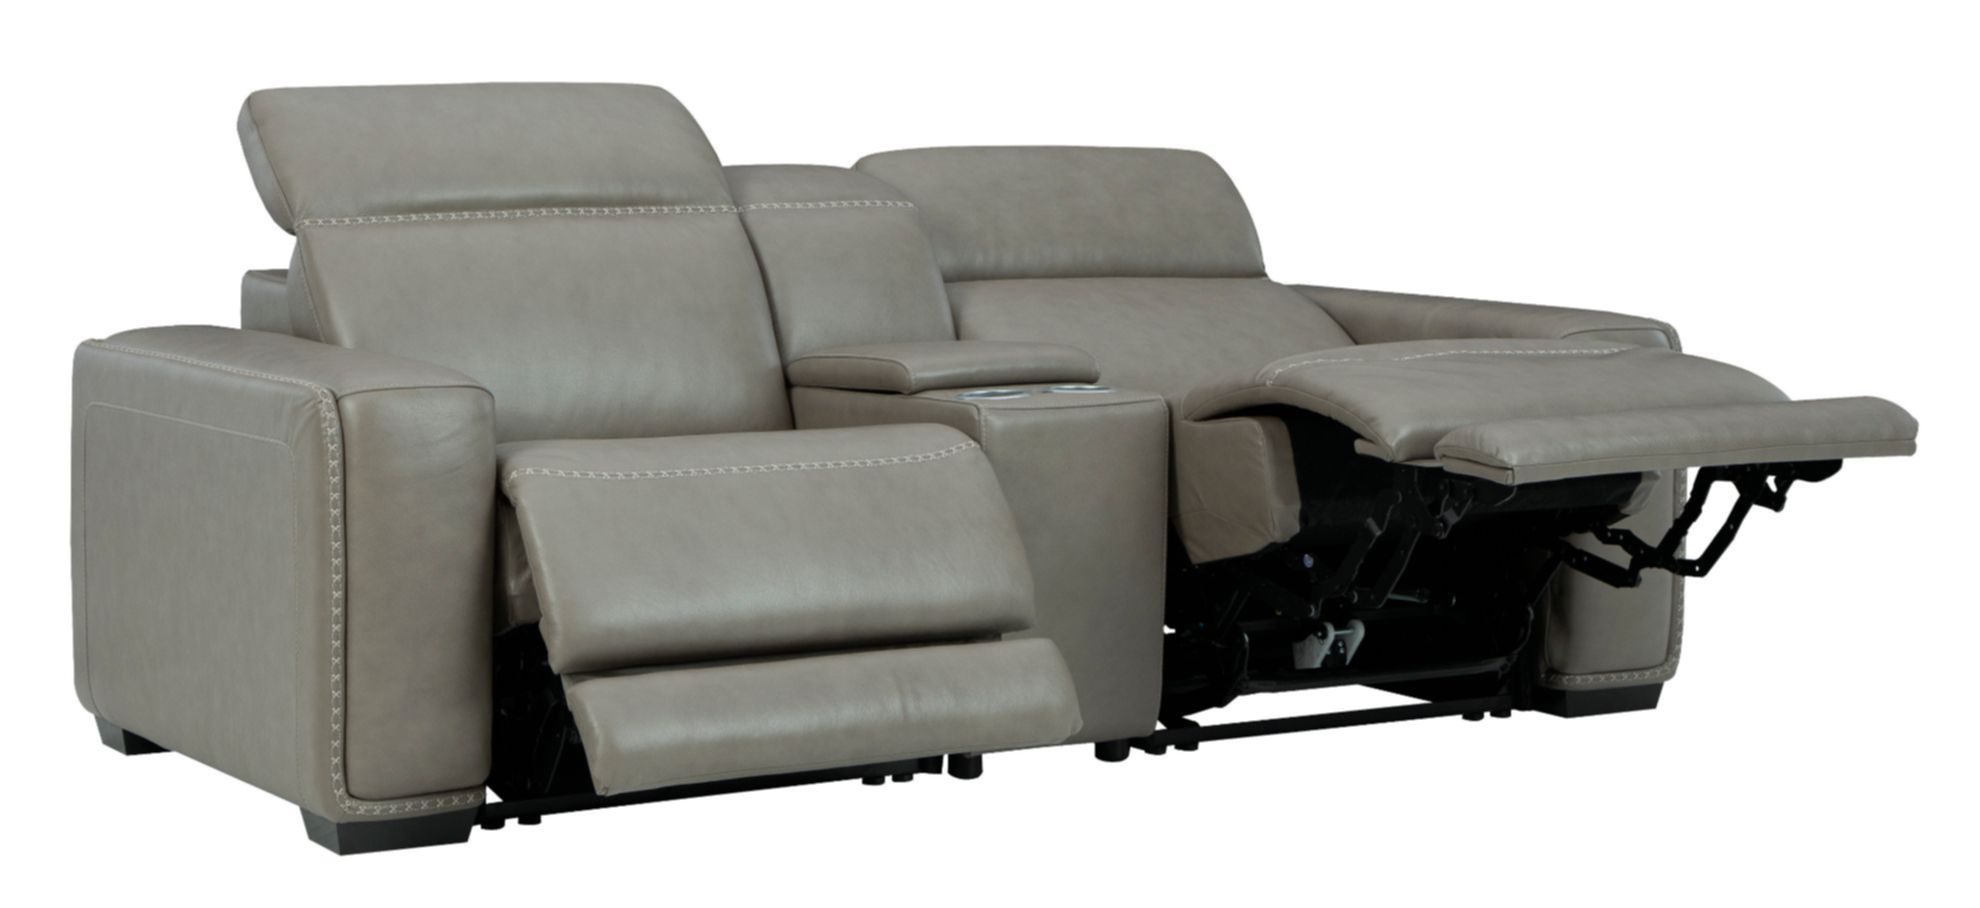 Picture of Correze Power Console Loveseat